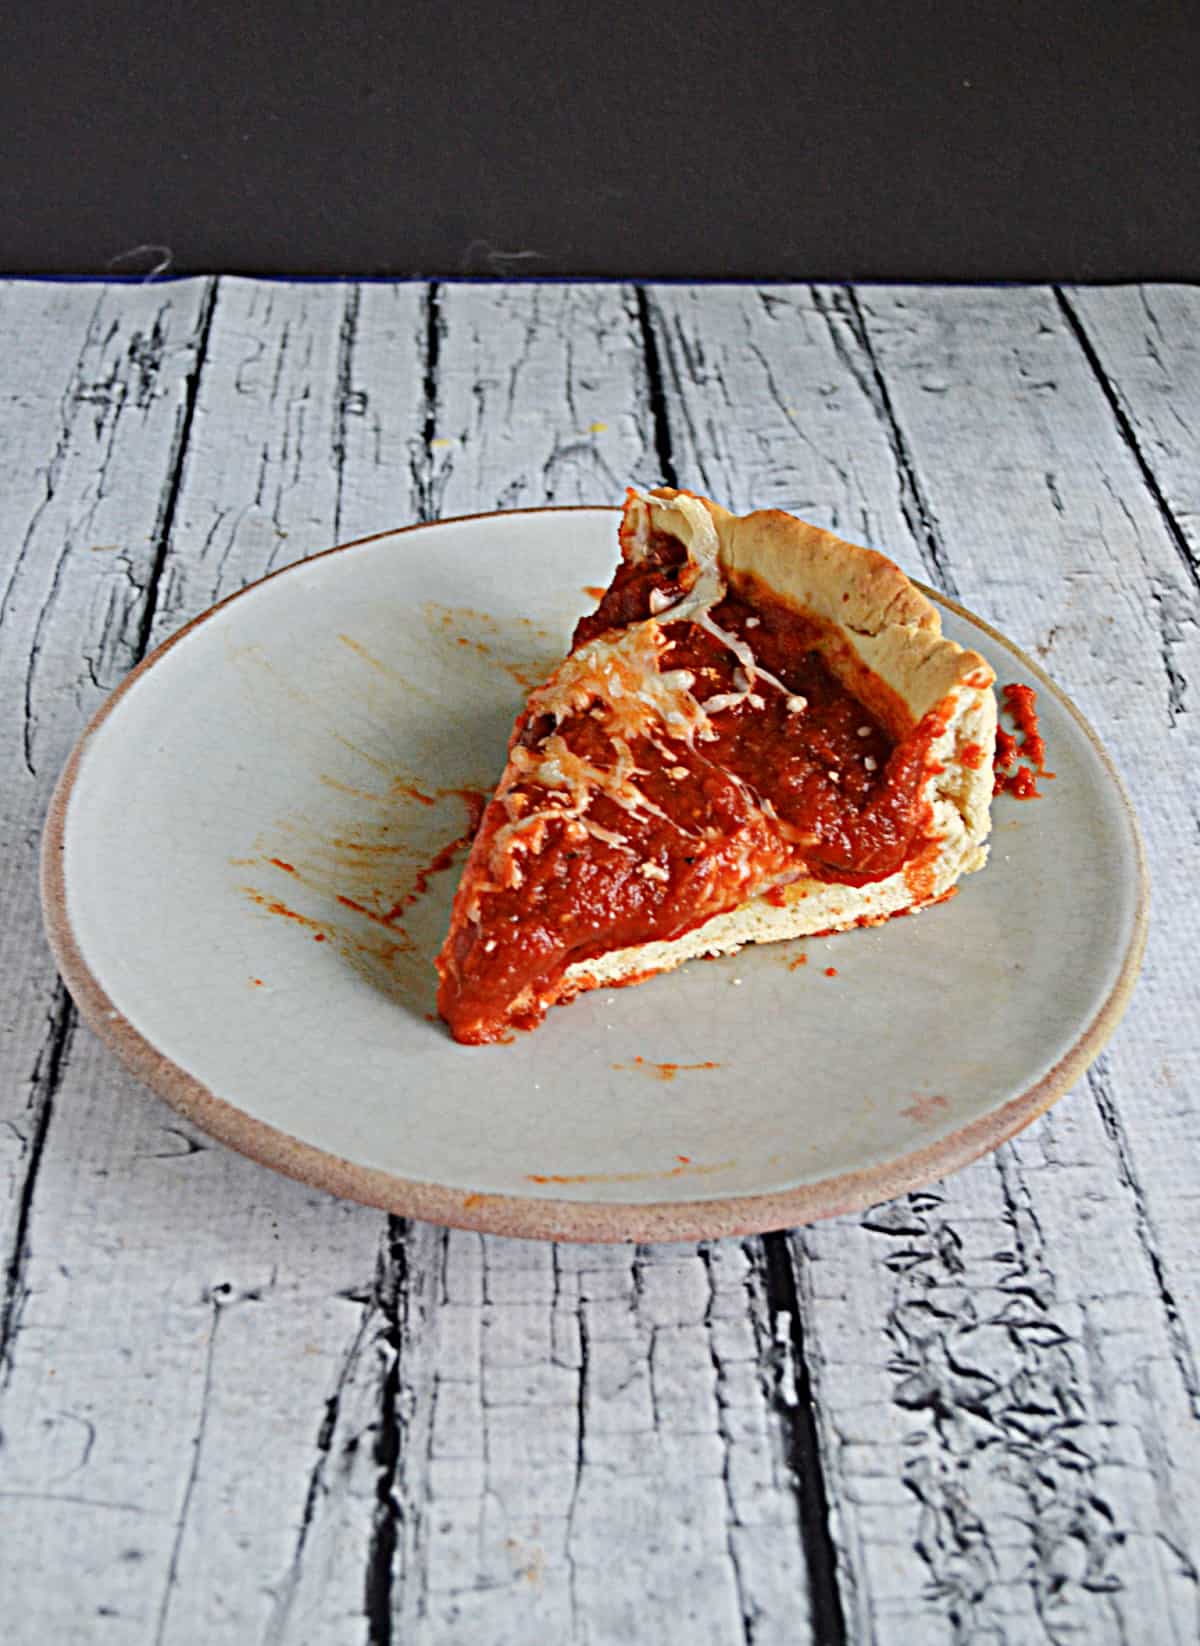 A plate with a slice of deep dish pizza on it.